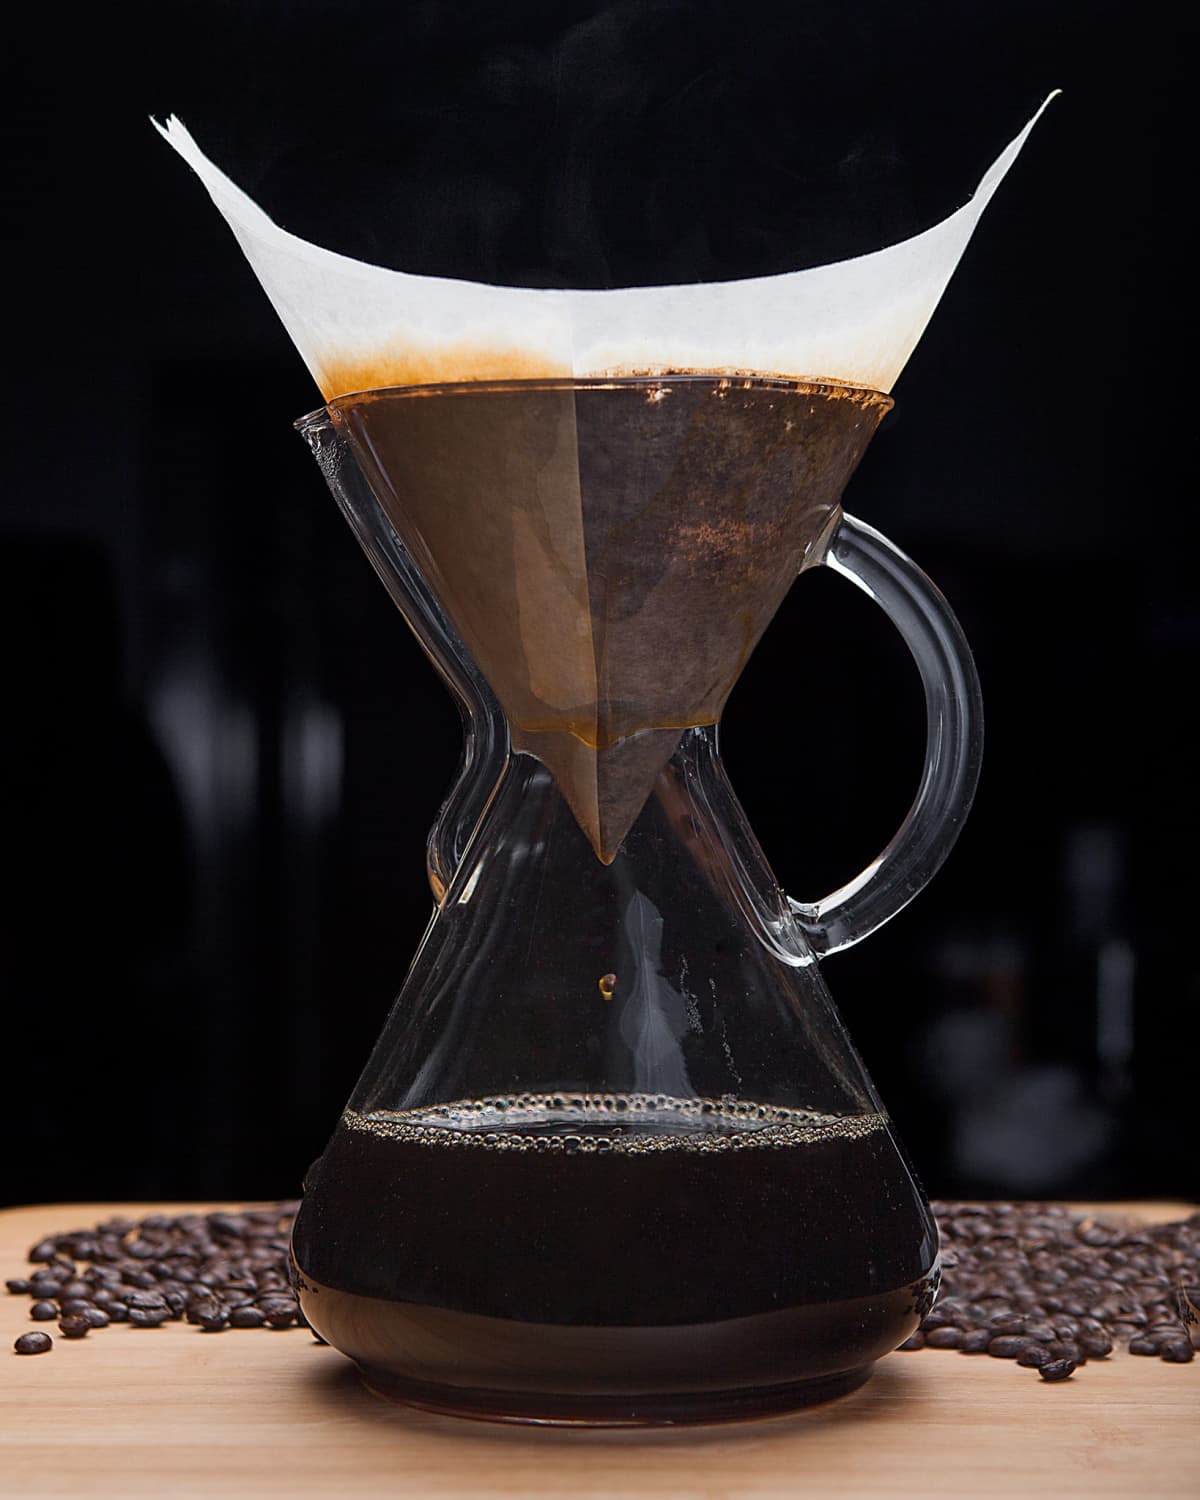 Coffee being filtered in large glass